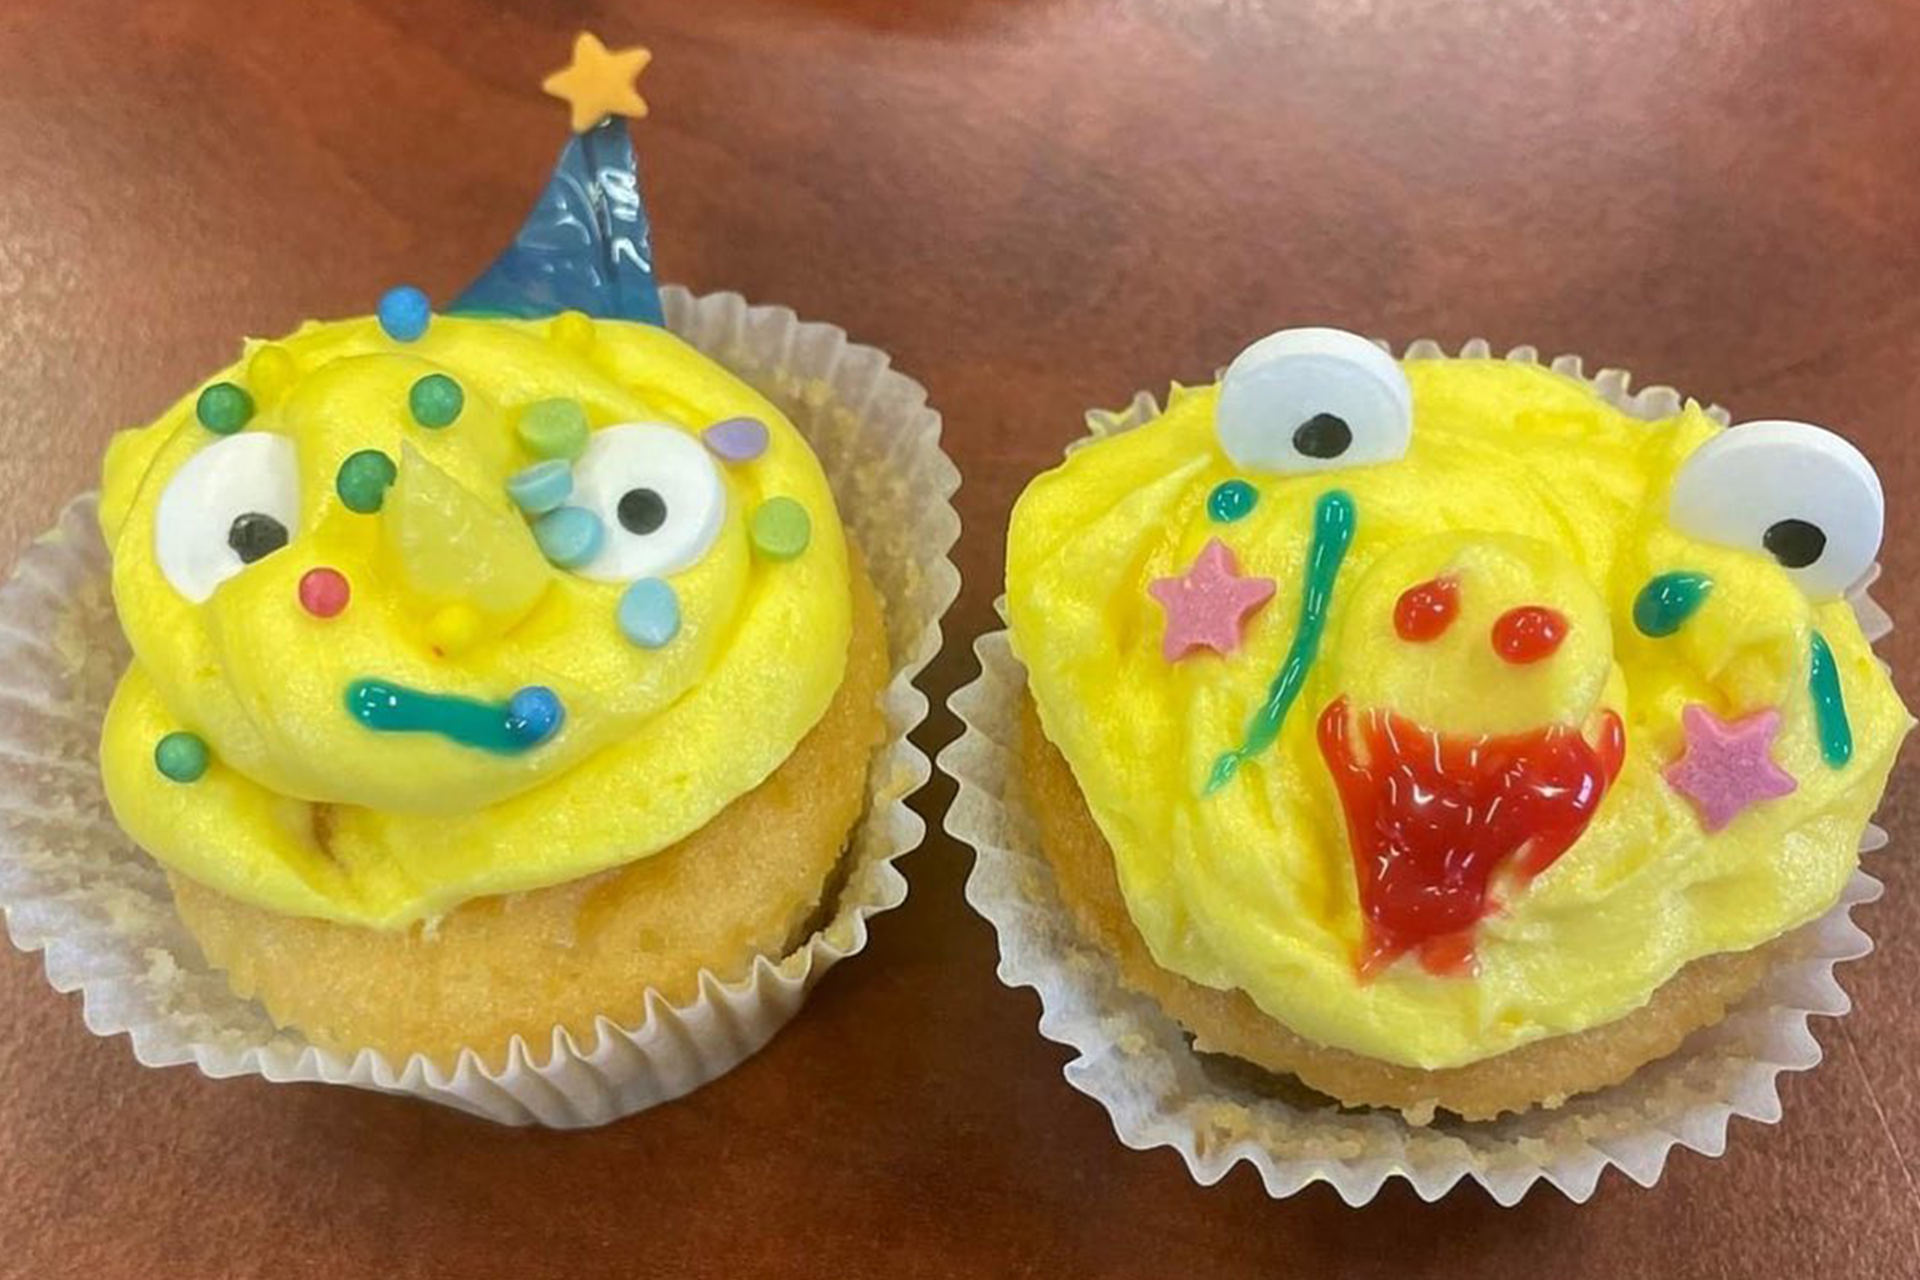 Two yellow cupcakes with faces made by students at Lathallan School.